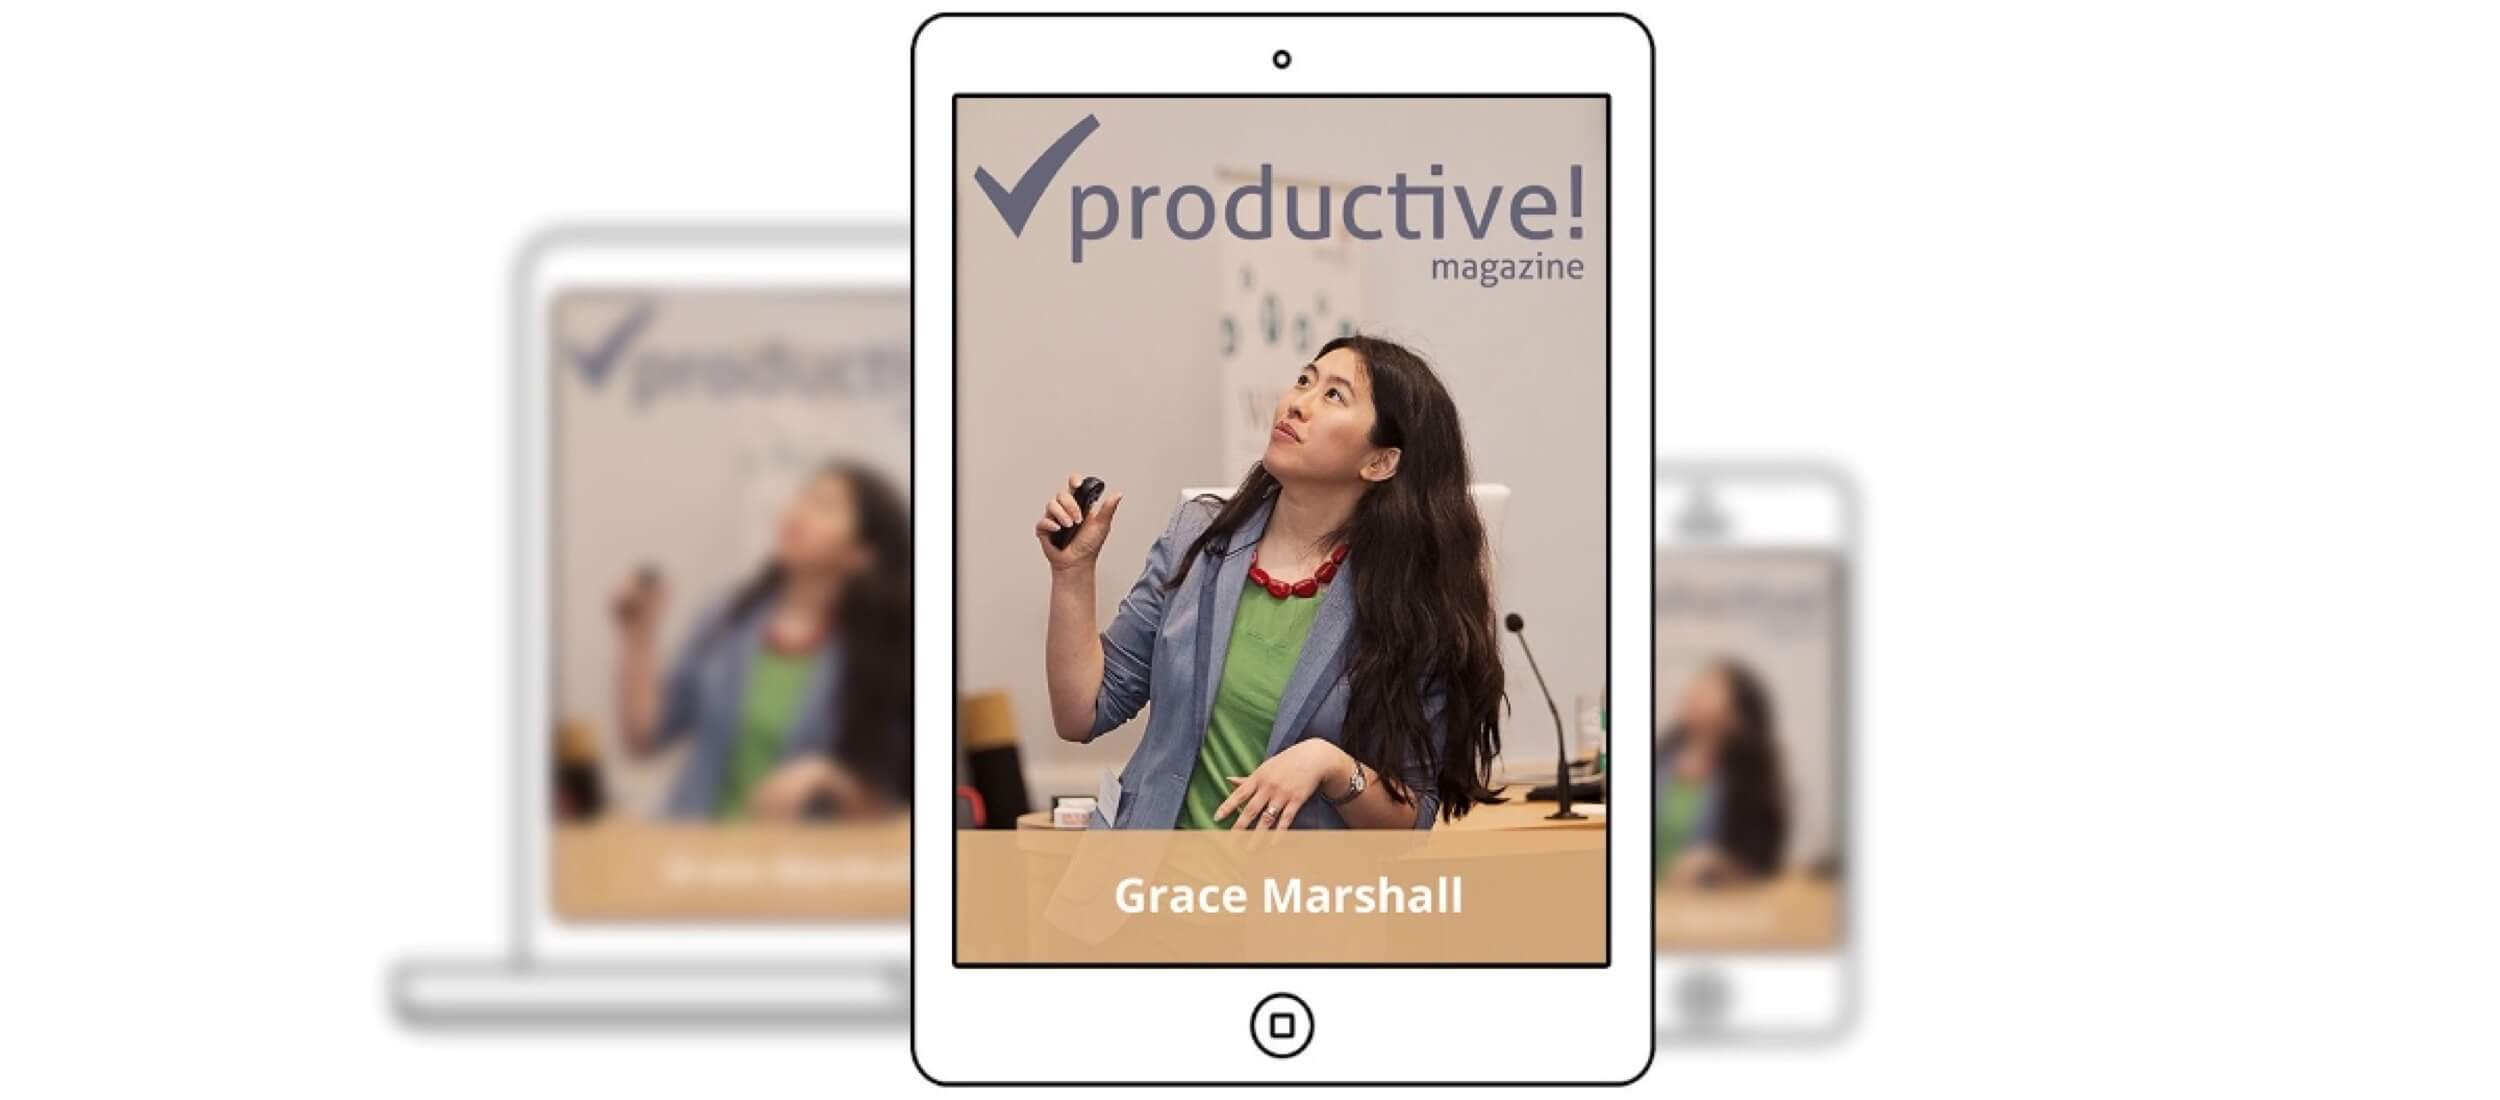 Workflow optimization - intro to Productive! Magazine No.31 with Grace Marshall